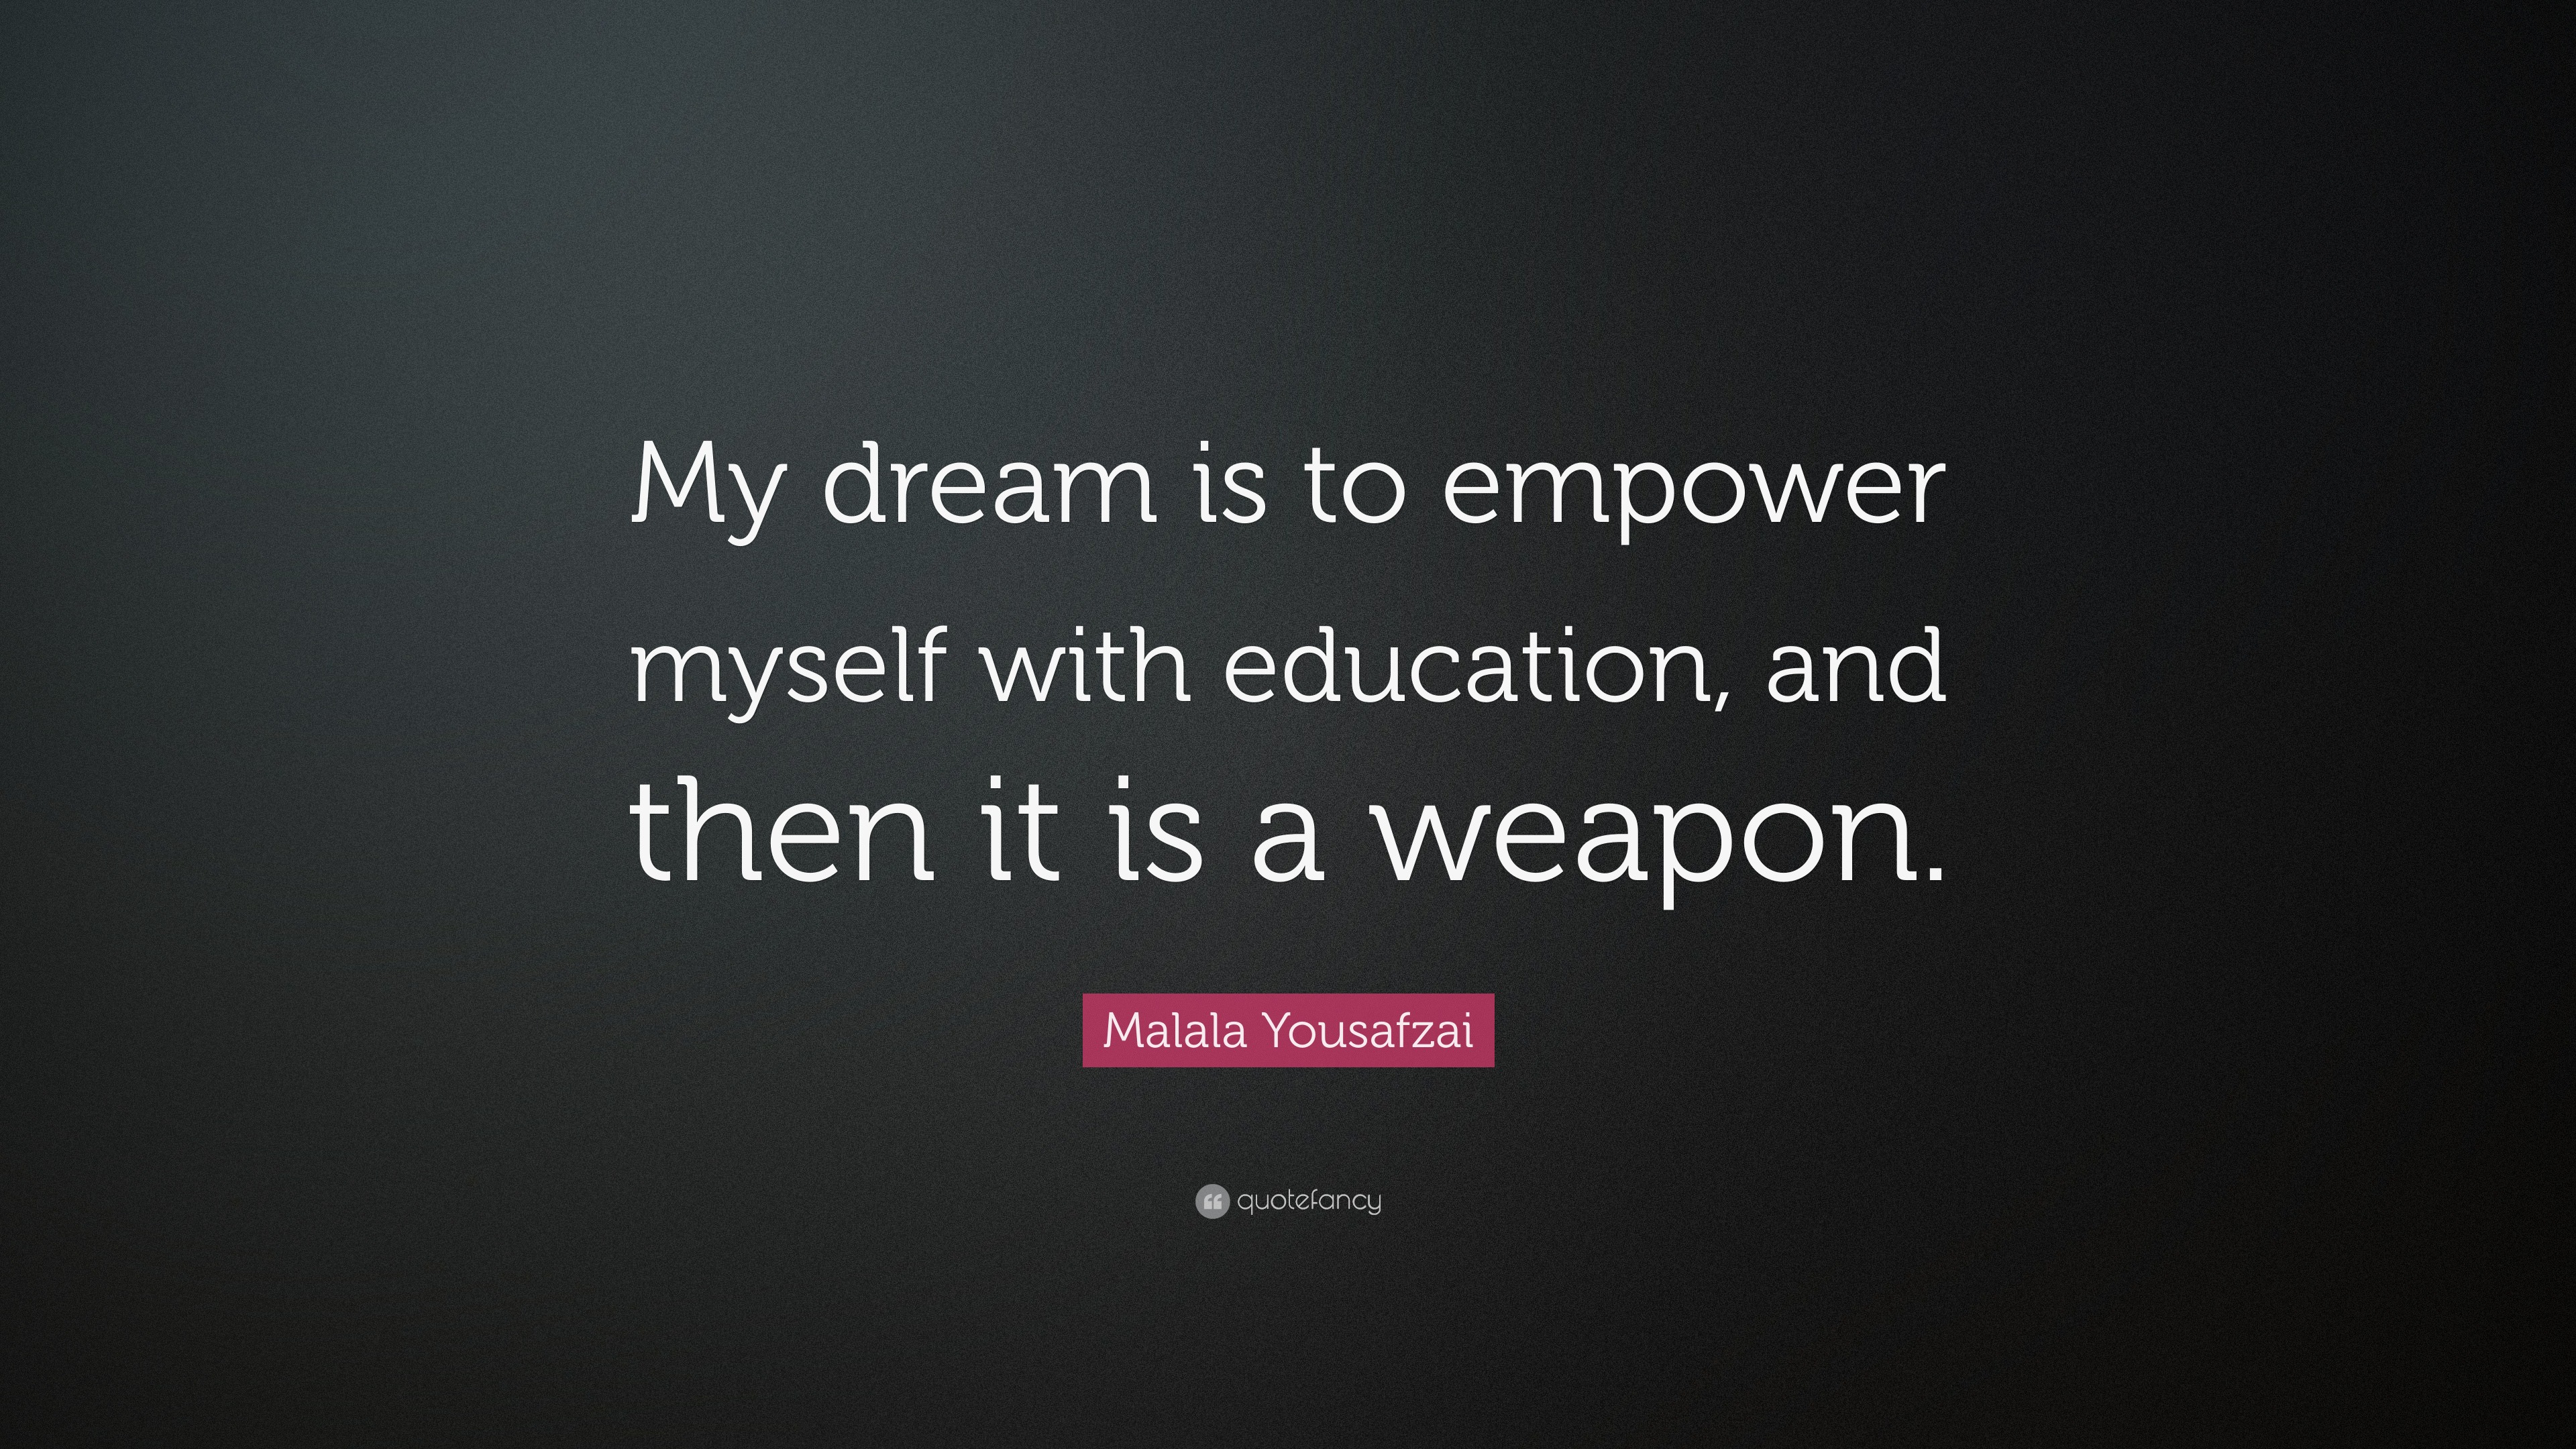 Malala Yousafzai Quote: “My dream is to empower myself with education ...
